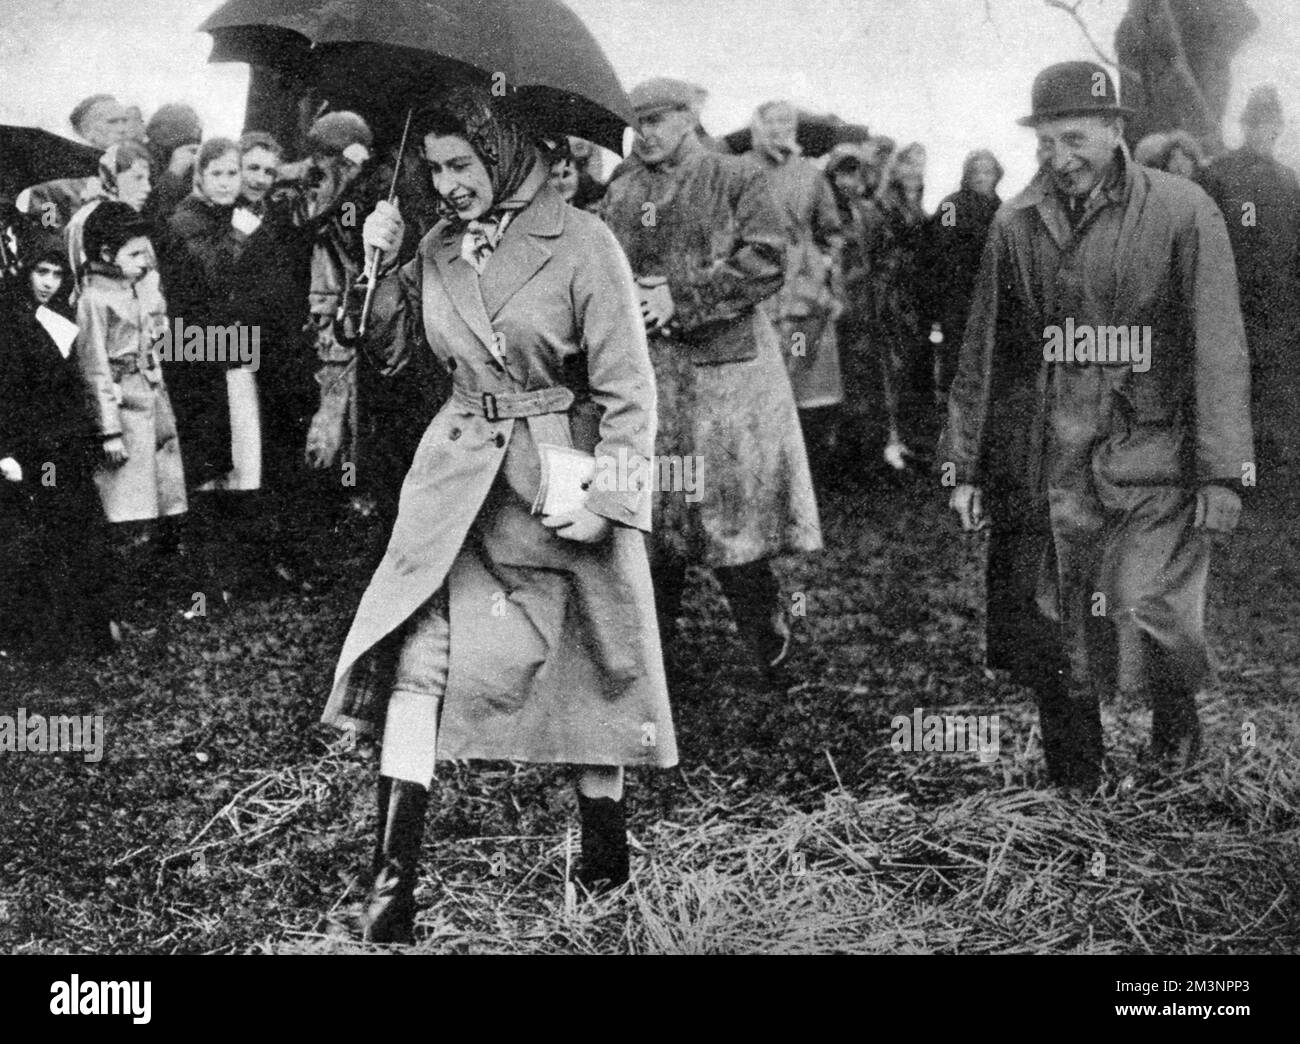 The Queen, well protected from the rain, walks across a muddy field to watch the dressage at the Badminton horse trials, 1959.     Date: 1959 Stock Photo